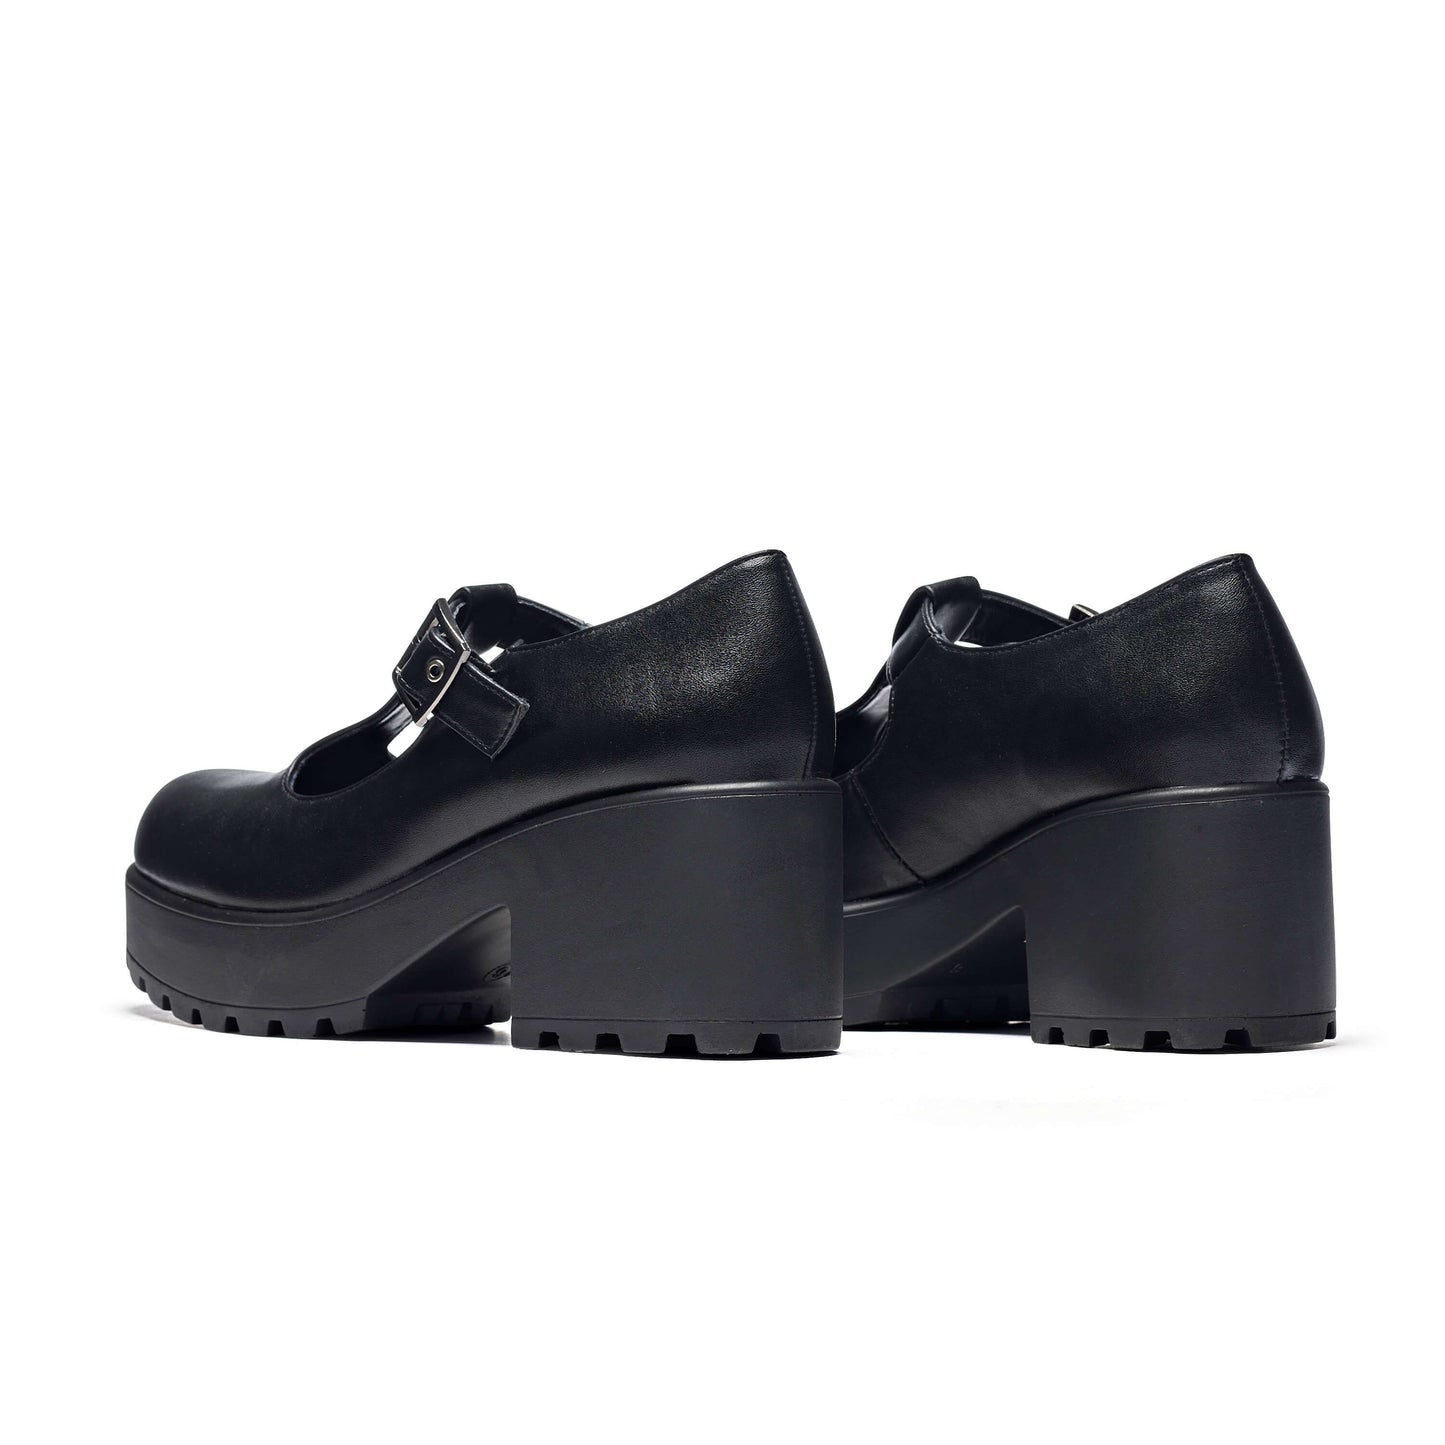 SAI Black Mary Jane Shoes 'Faux Leather Edition' - Mary Janes - KOI Footwear - Black - Back View